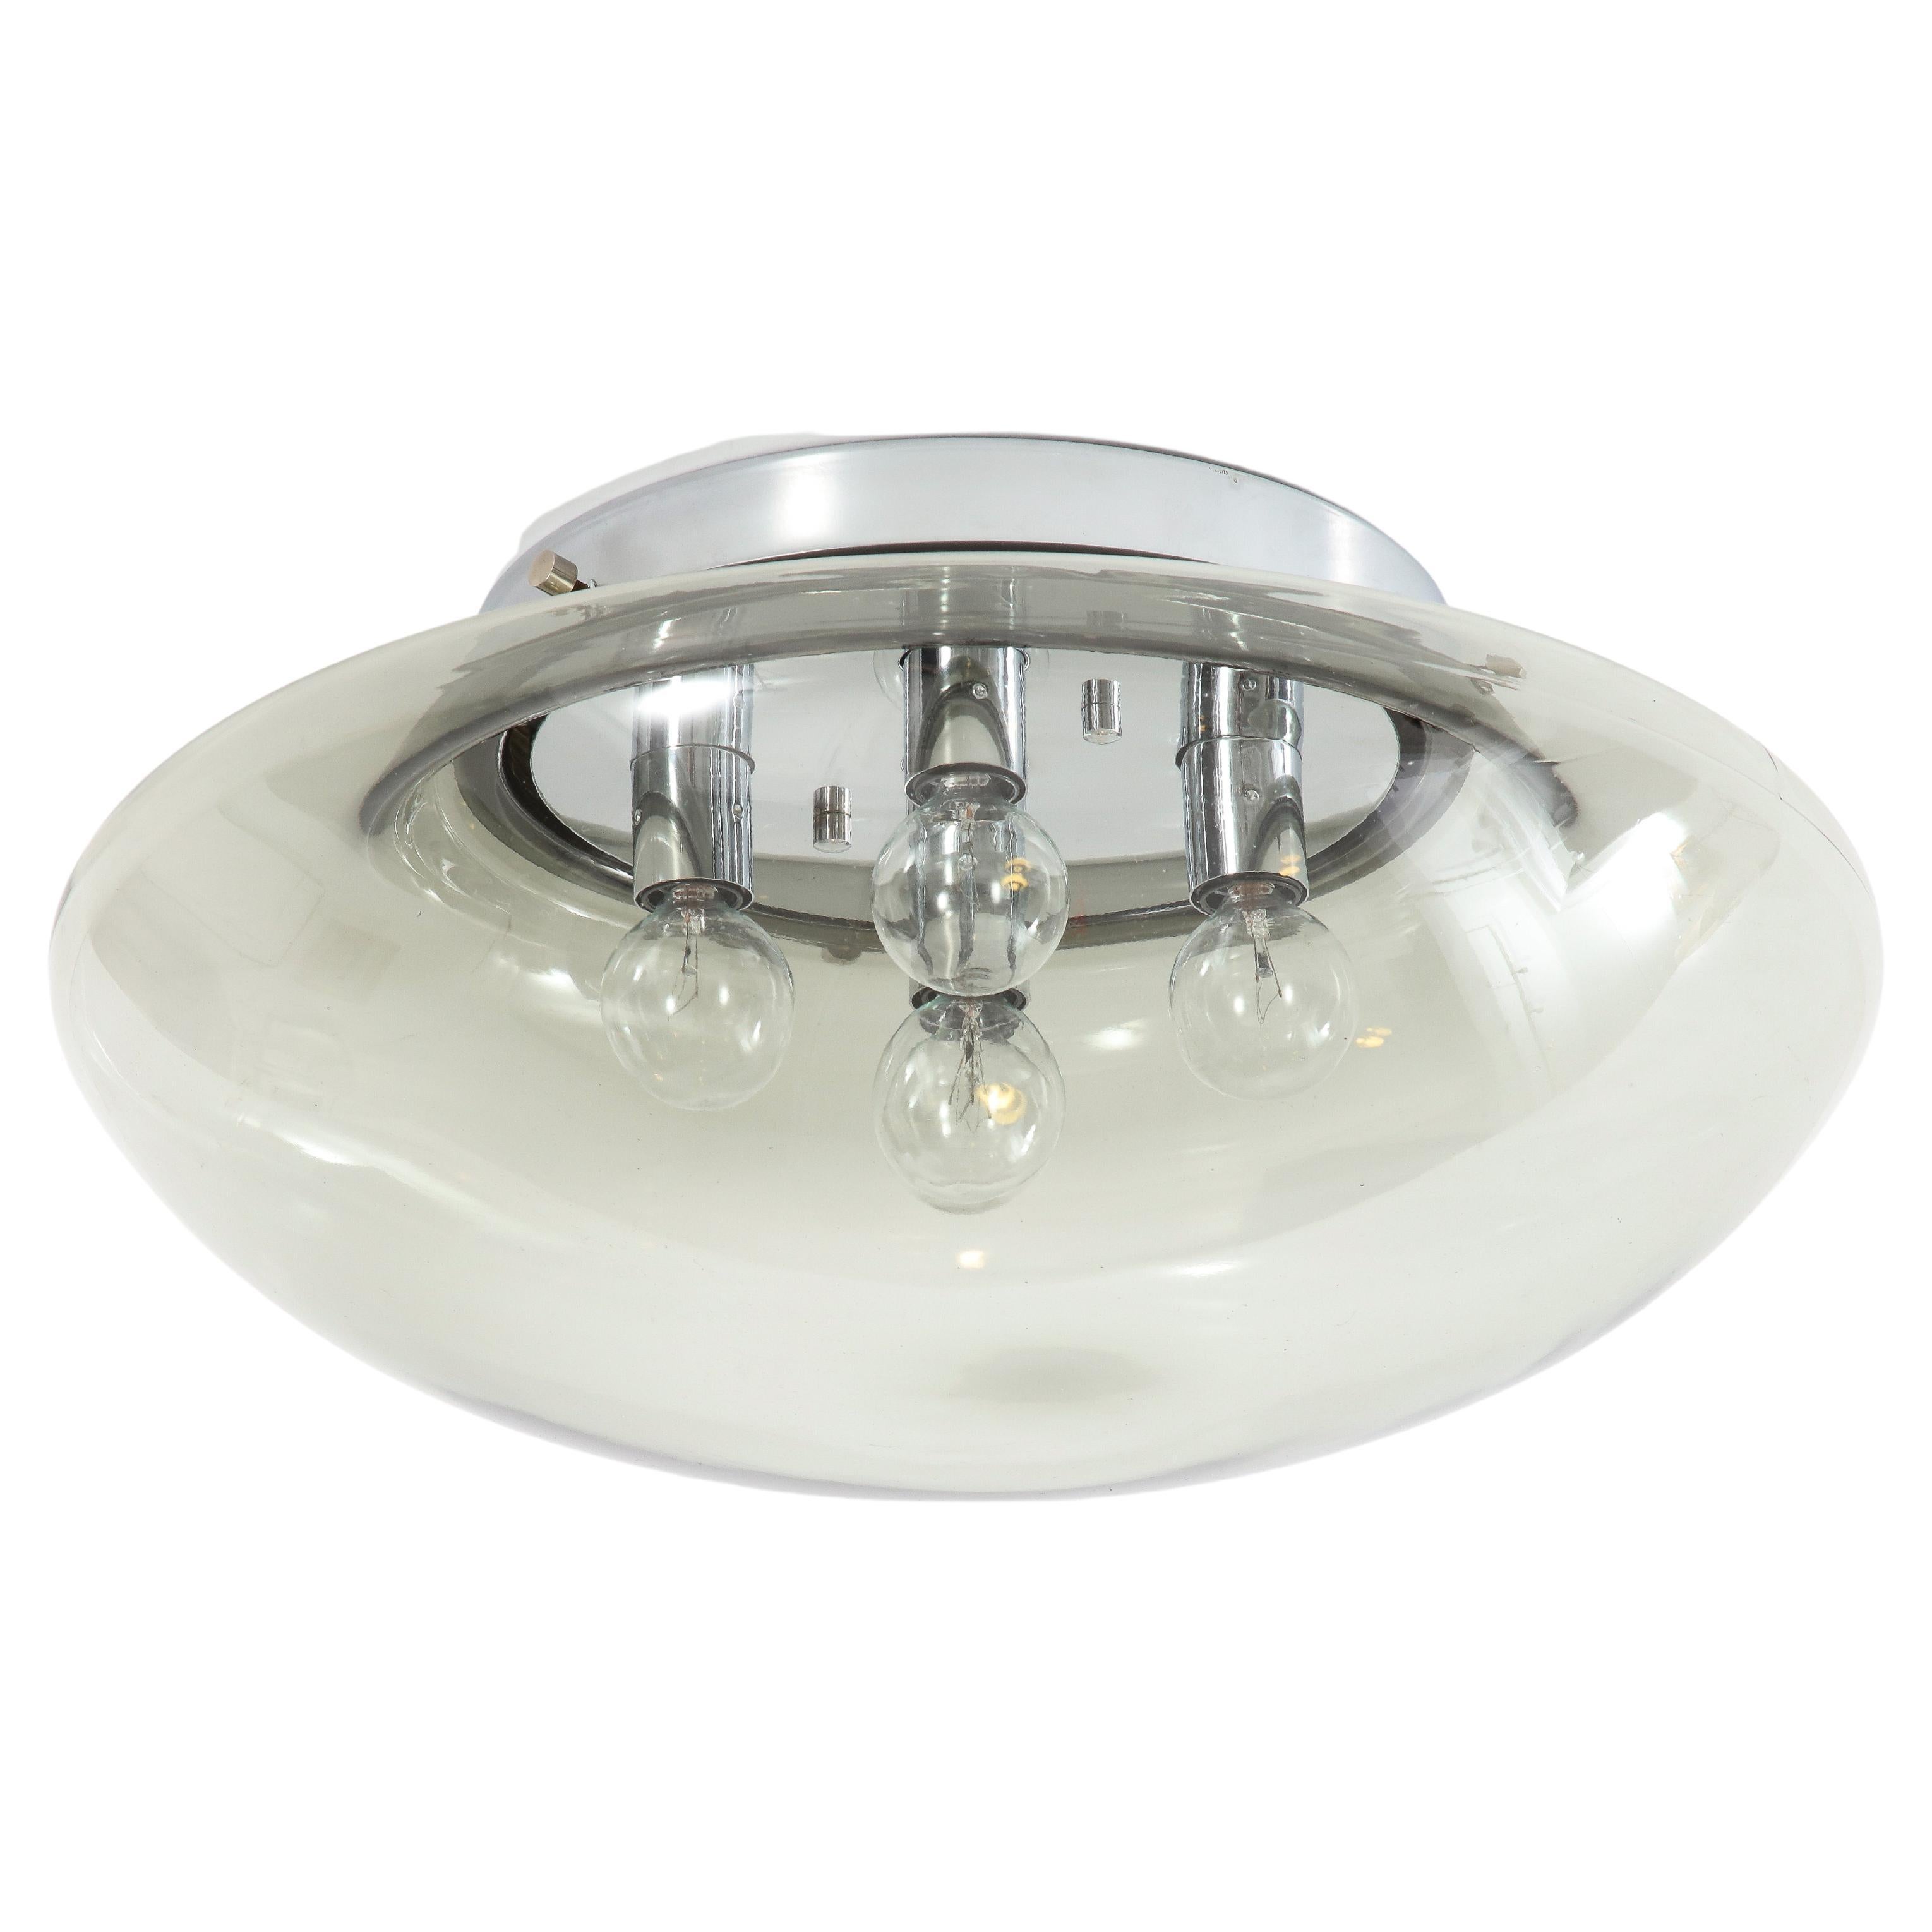 1970's Space Age Smoked Gray Flush Mount / Sconce For Sale